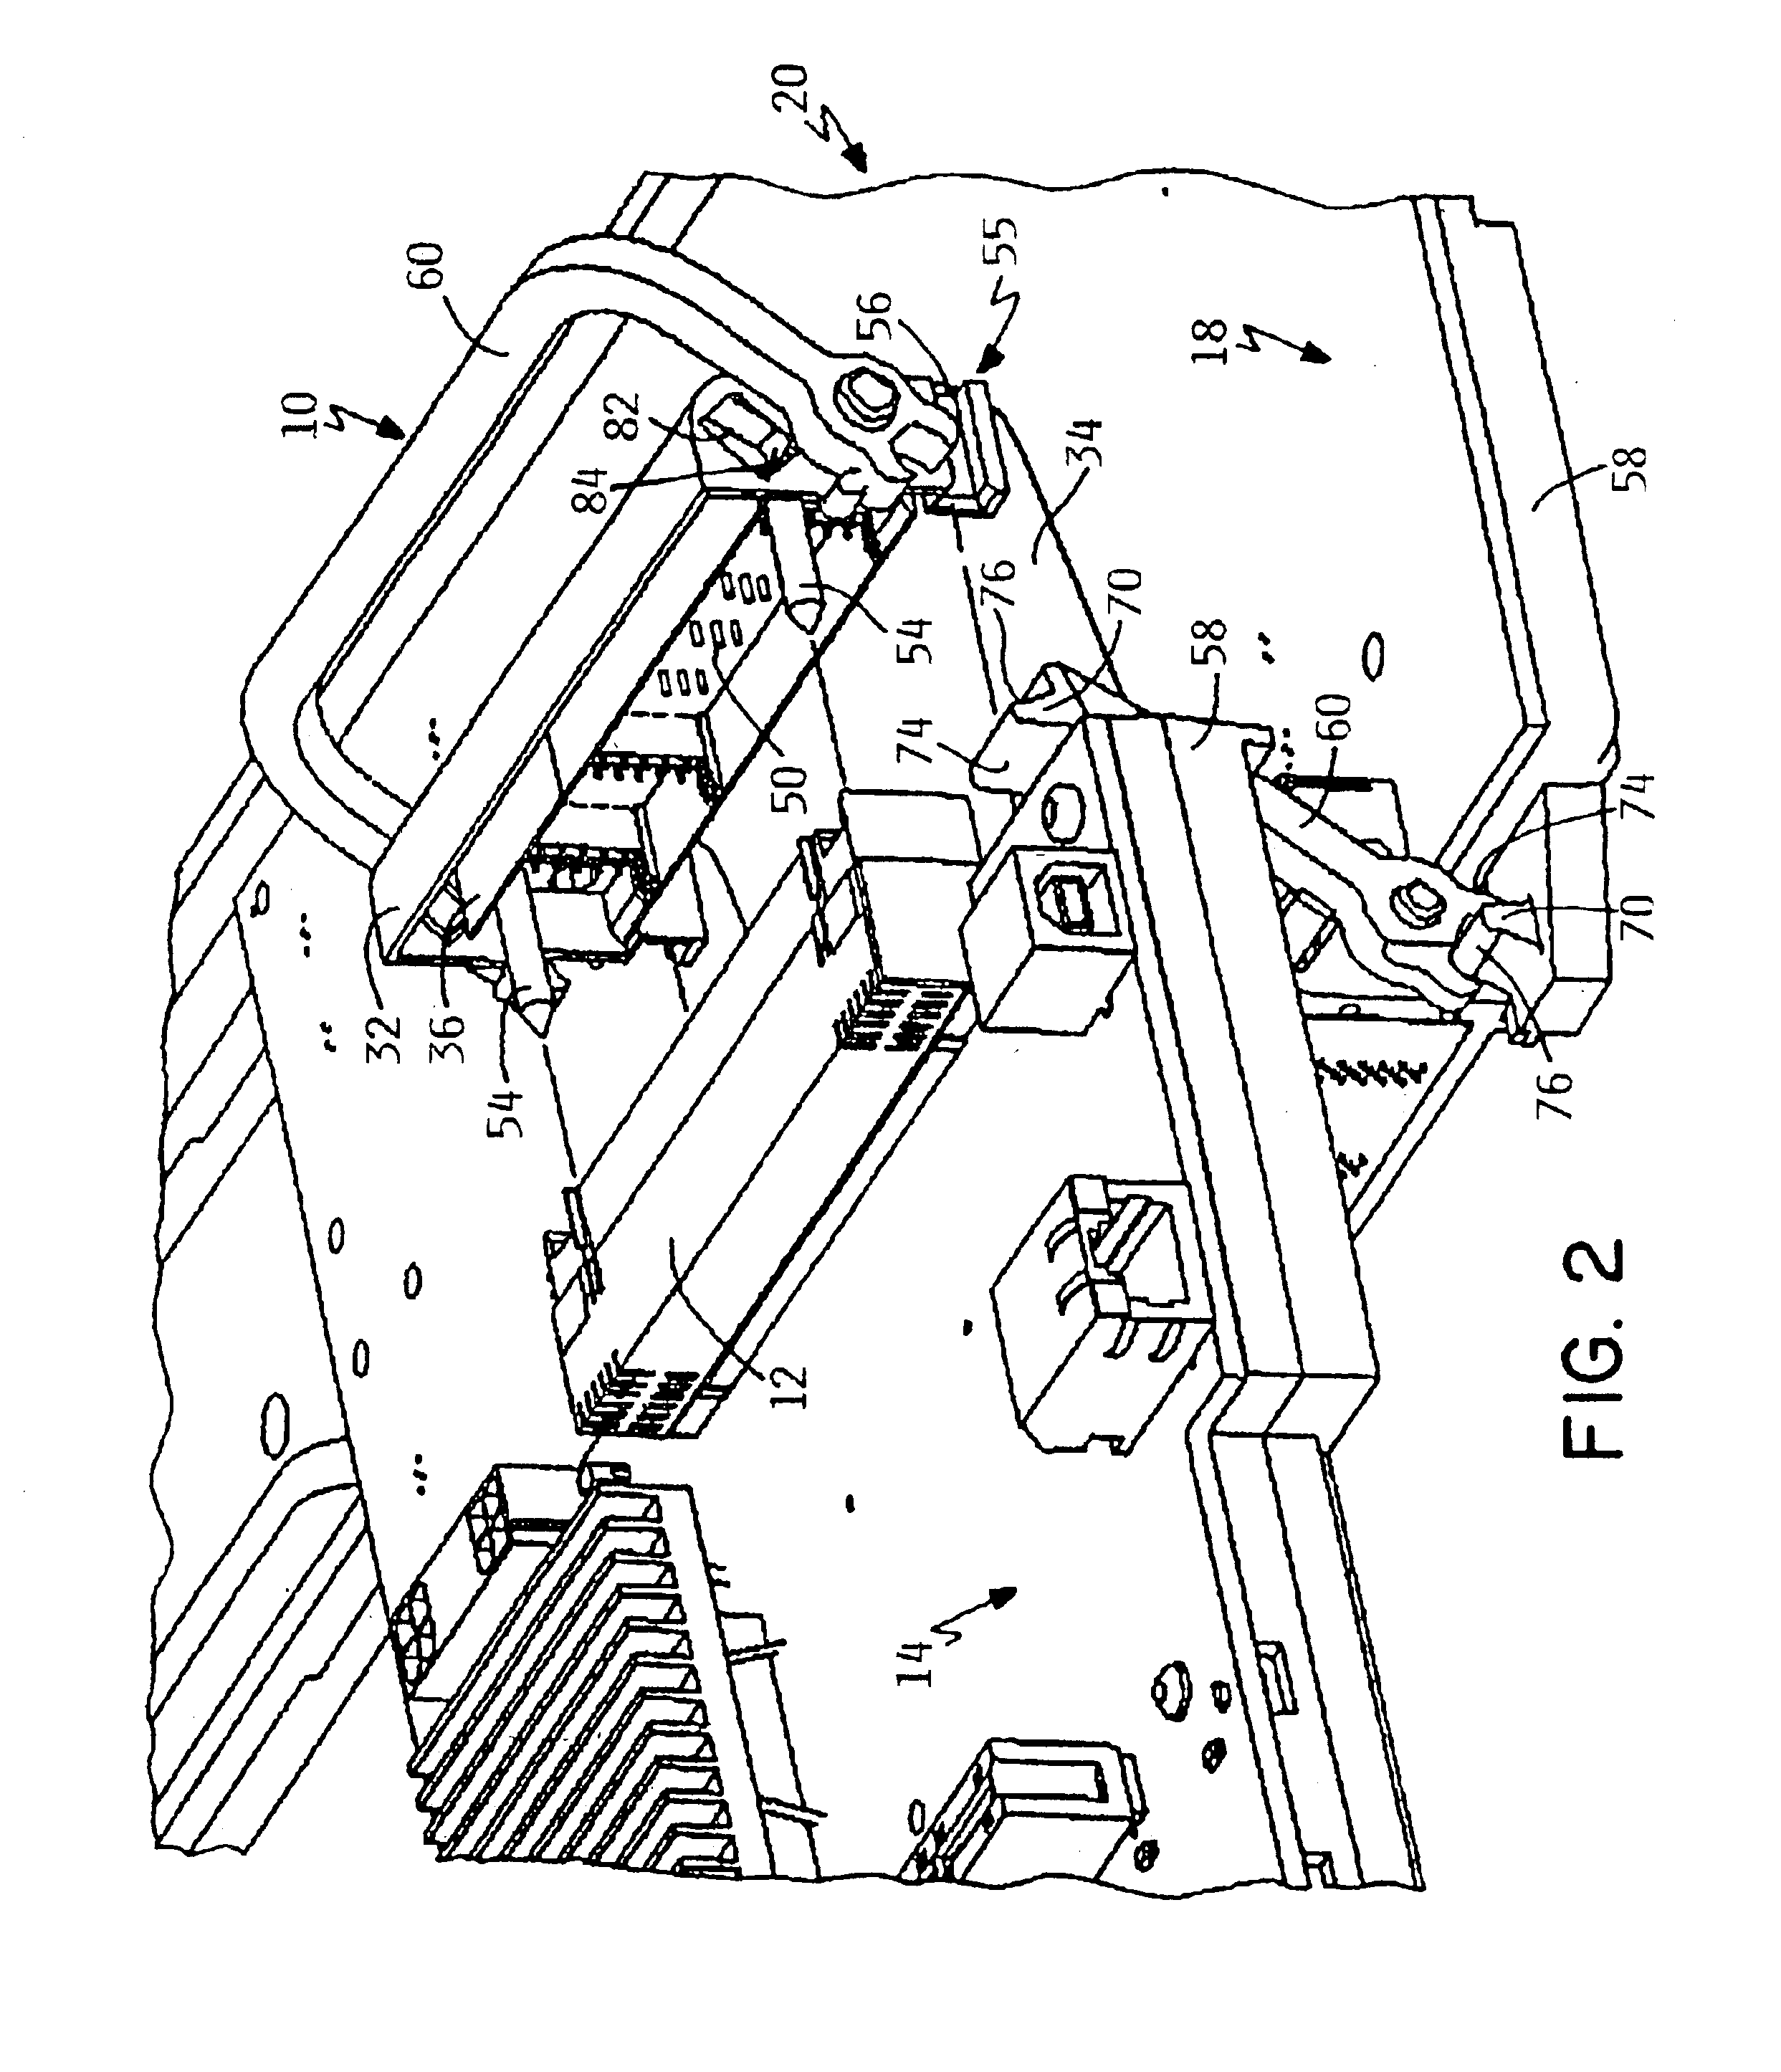 Connector coupling mechanism, system and method